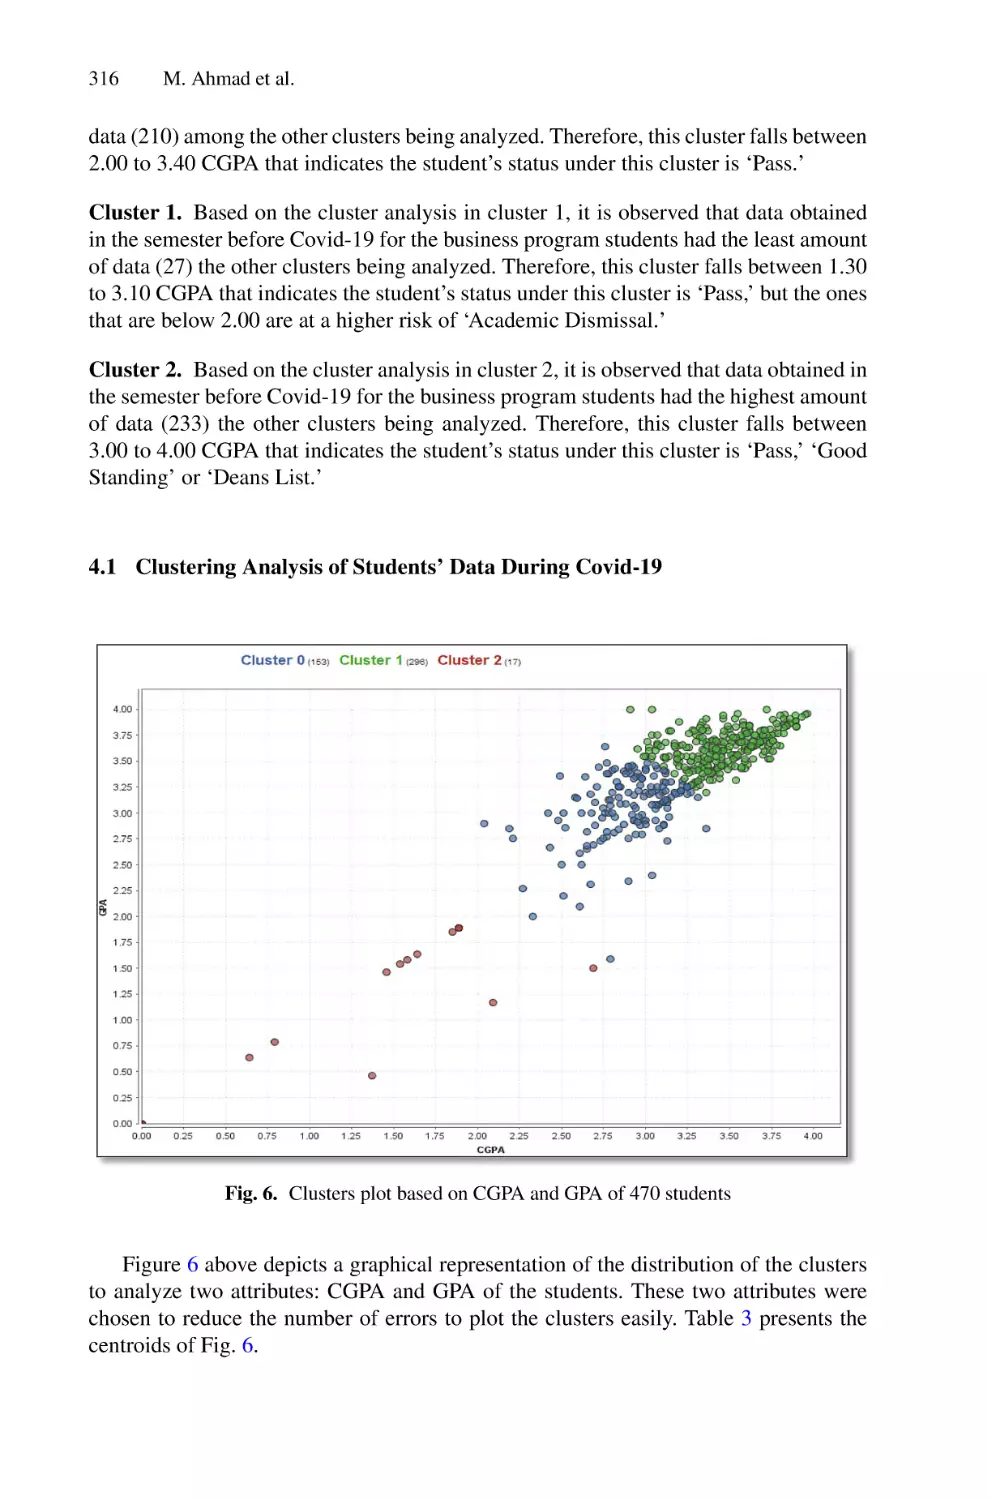 4.1 Clustering Analysis of Students’ Data During Covid-19